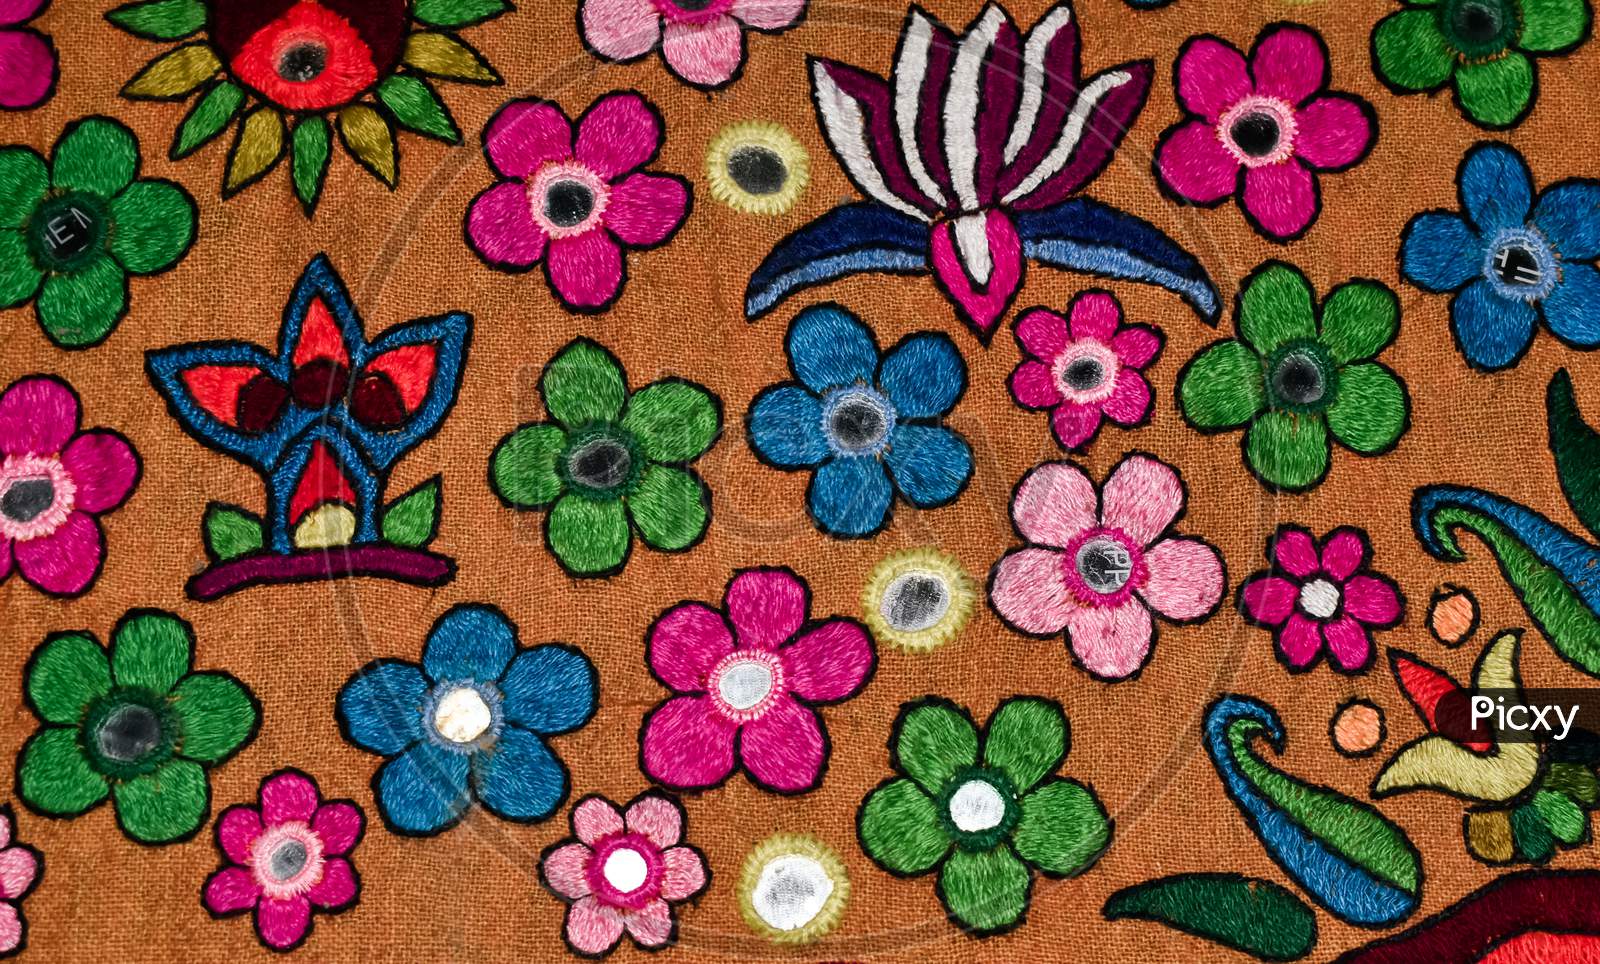 Background Colorful Image Of Hand Made Flower Design.